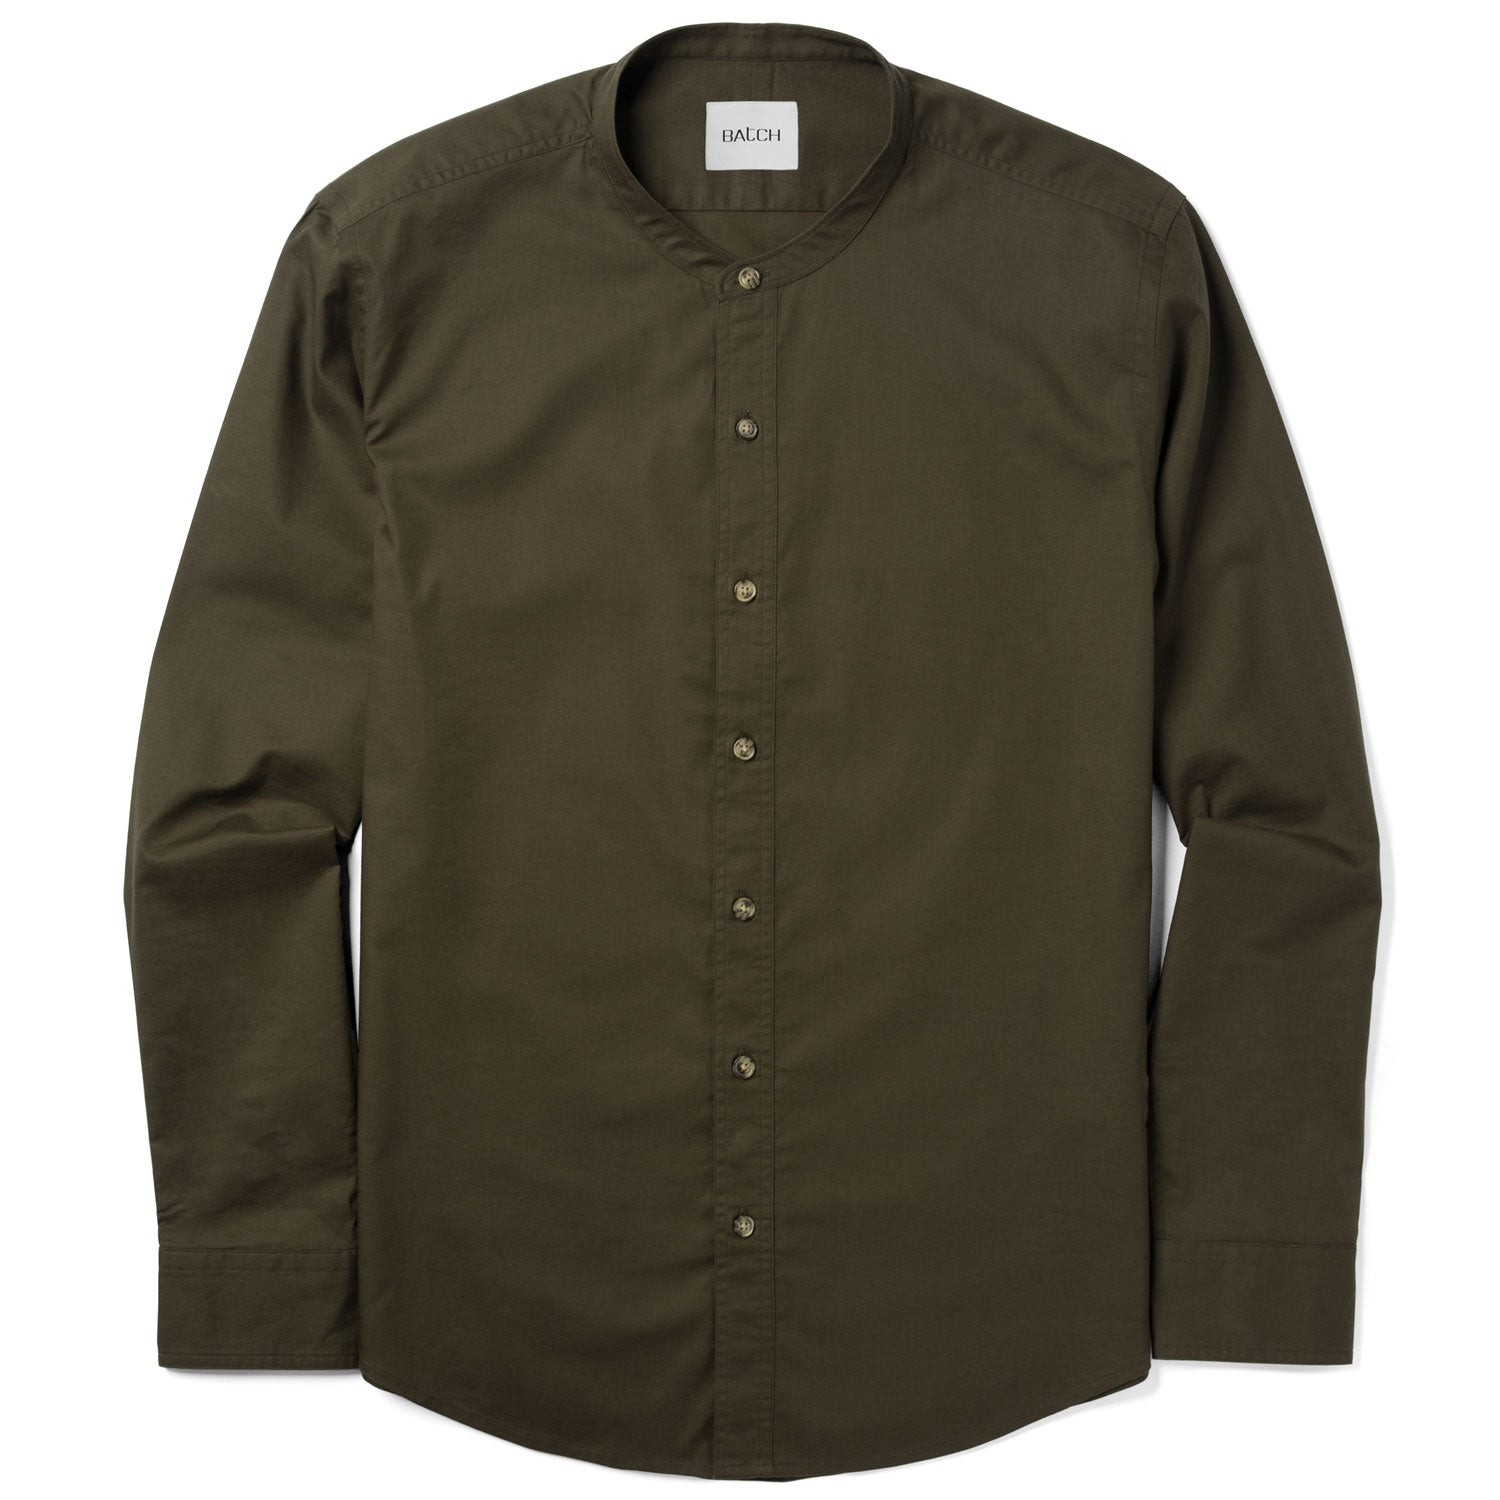 Essential Band Collar Button Down Shirt - Olive Green Cotton Twill